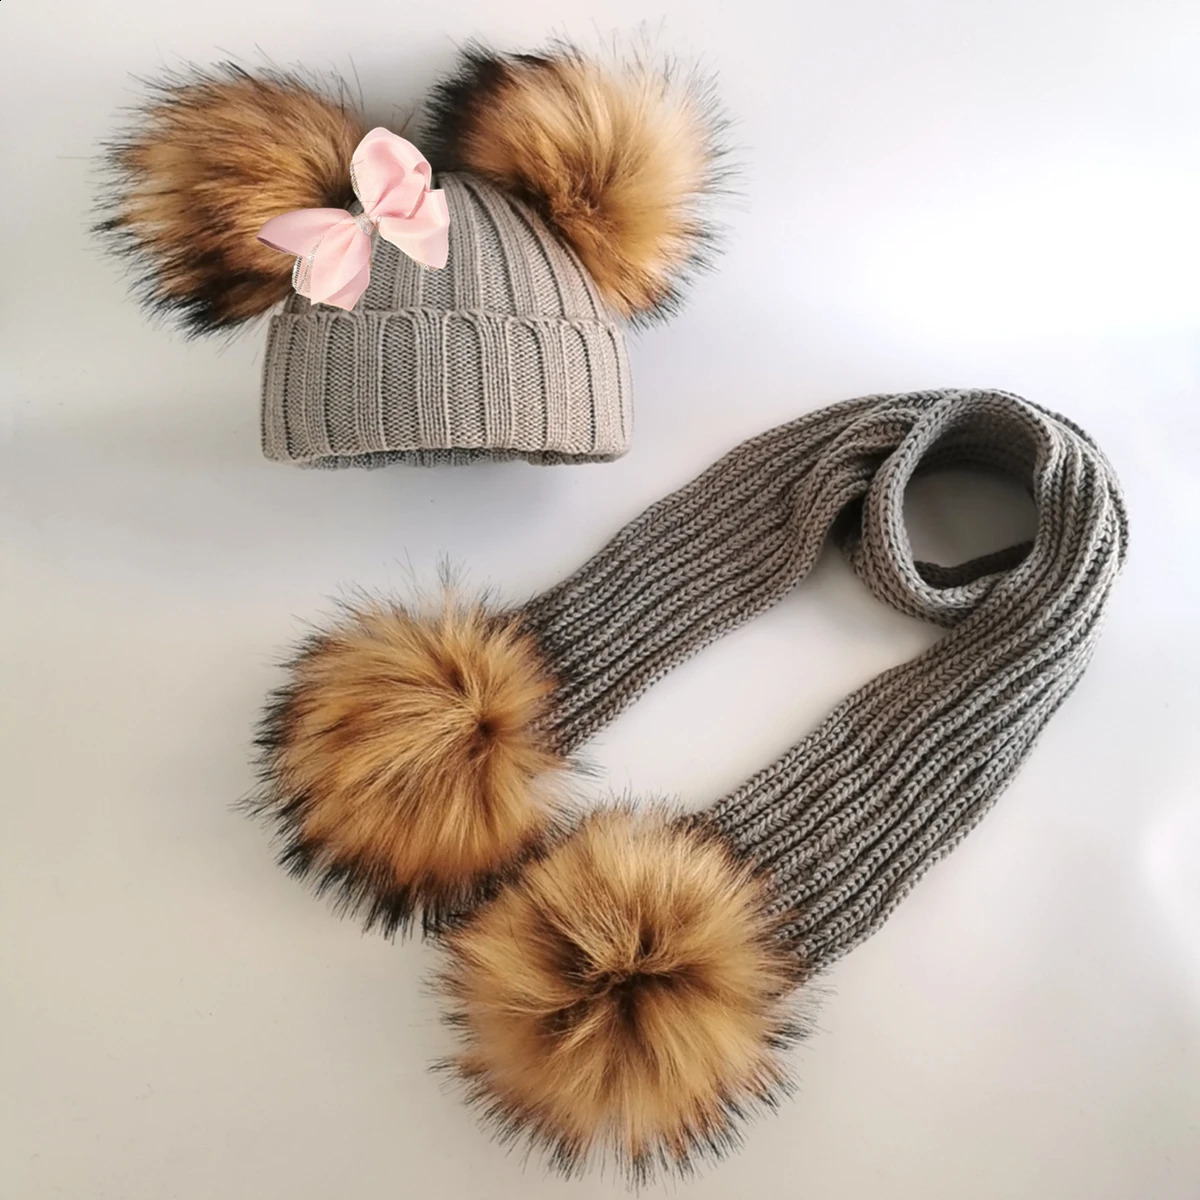 Pillows kids winter toddler baby faux fur butterfly ribbon tie hat cap beanie with 2 two double pom poms scarf ears for girl 231030